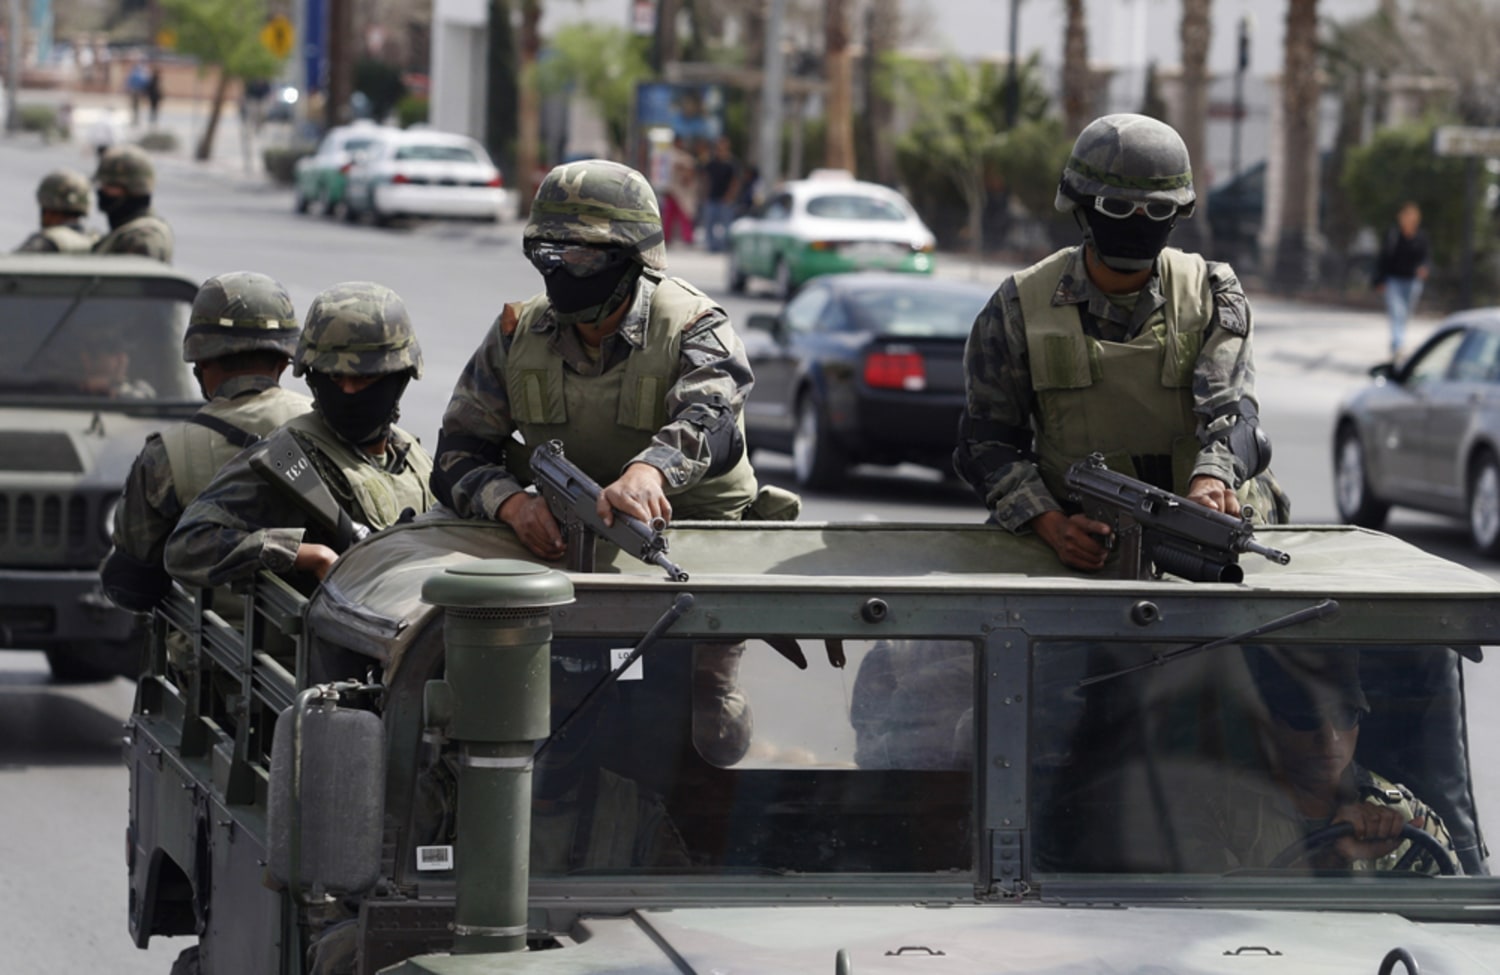 As Mexico battles cartels, army becomes law